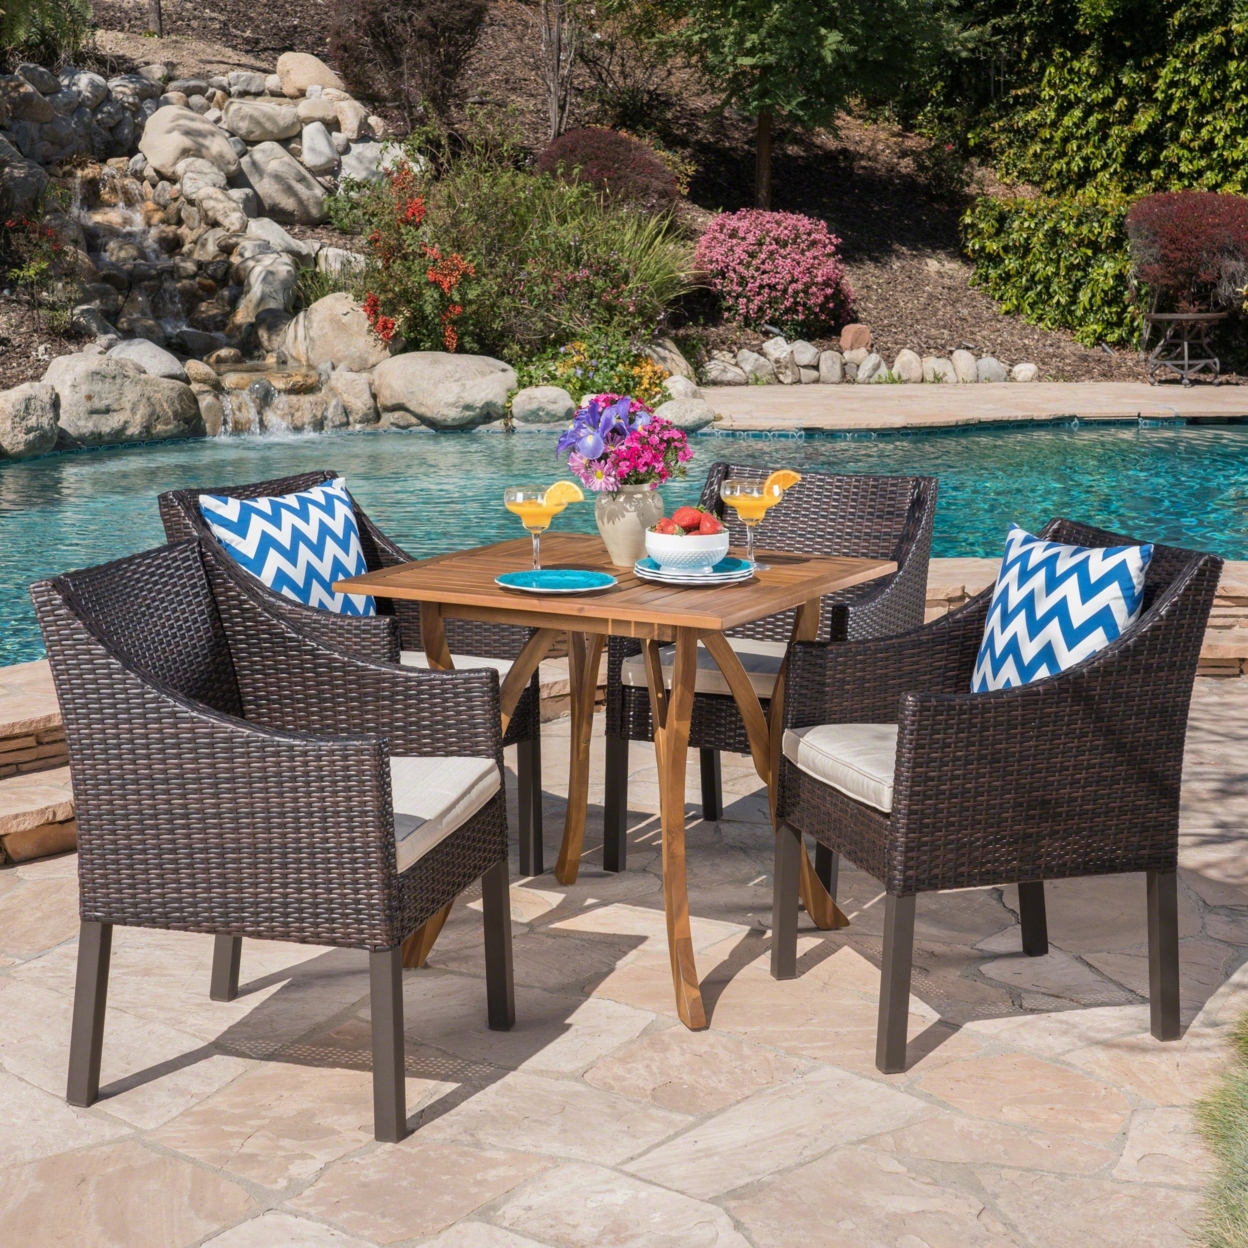 Marcy Outdoor 5 Piece Acacia Wood/ Wicker Dining Set With Cushions, Teak Finish And Multibrown With Beige